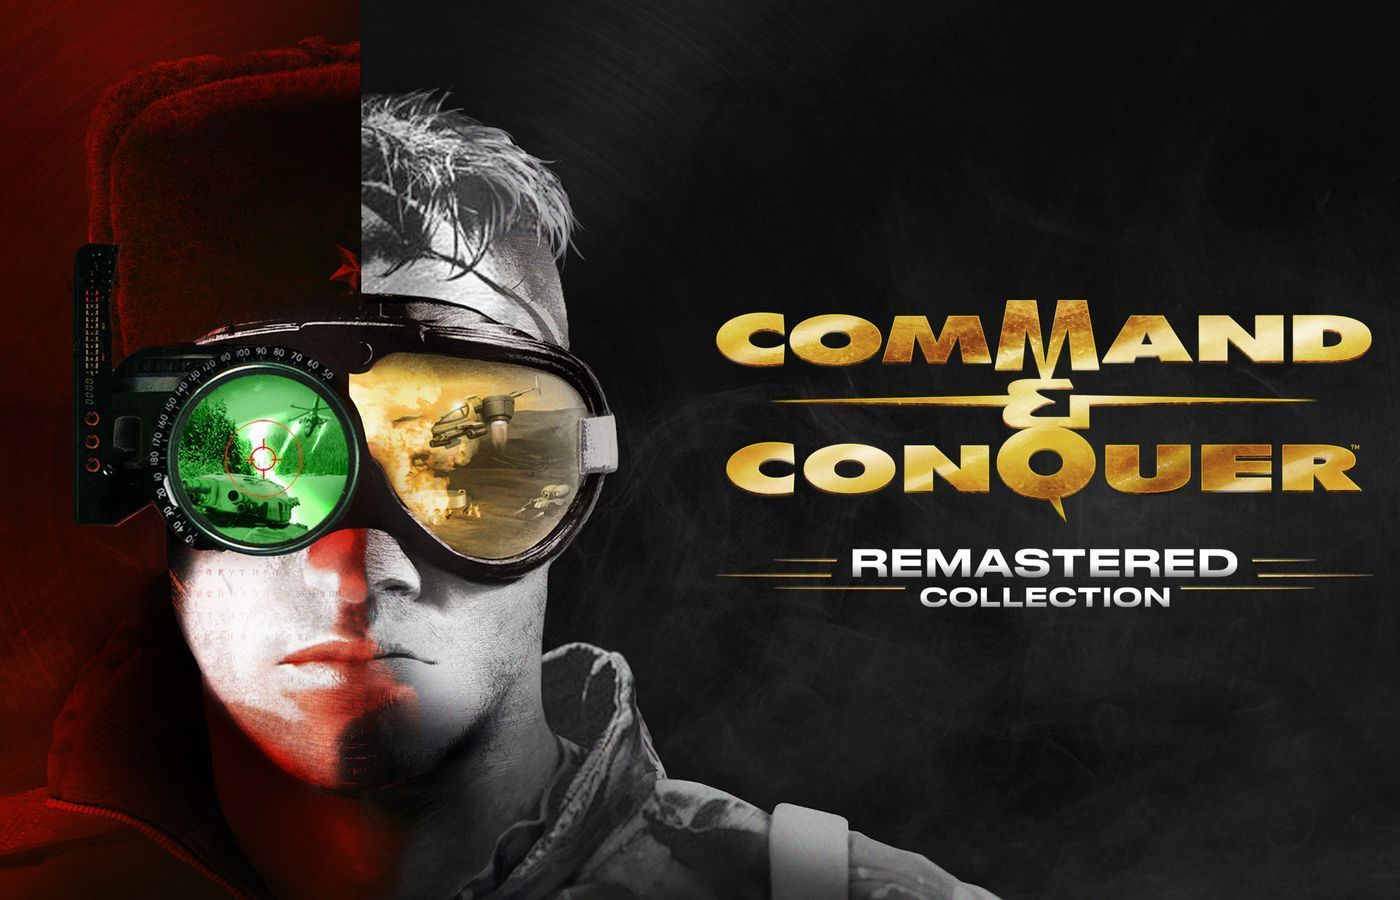 Electronic Arts distribue le code-source de Command & Conquer Remastered Collection